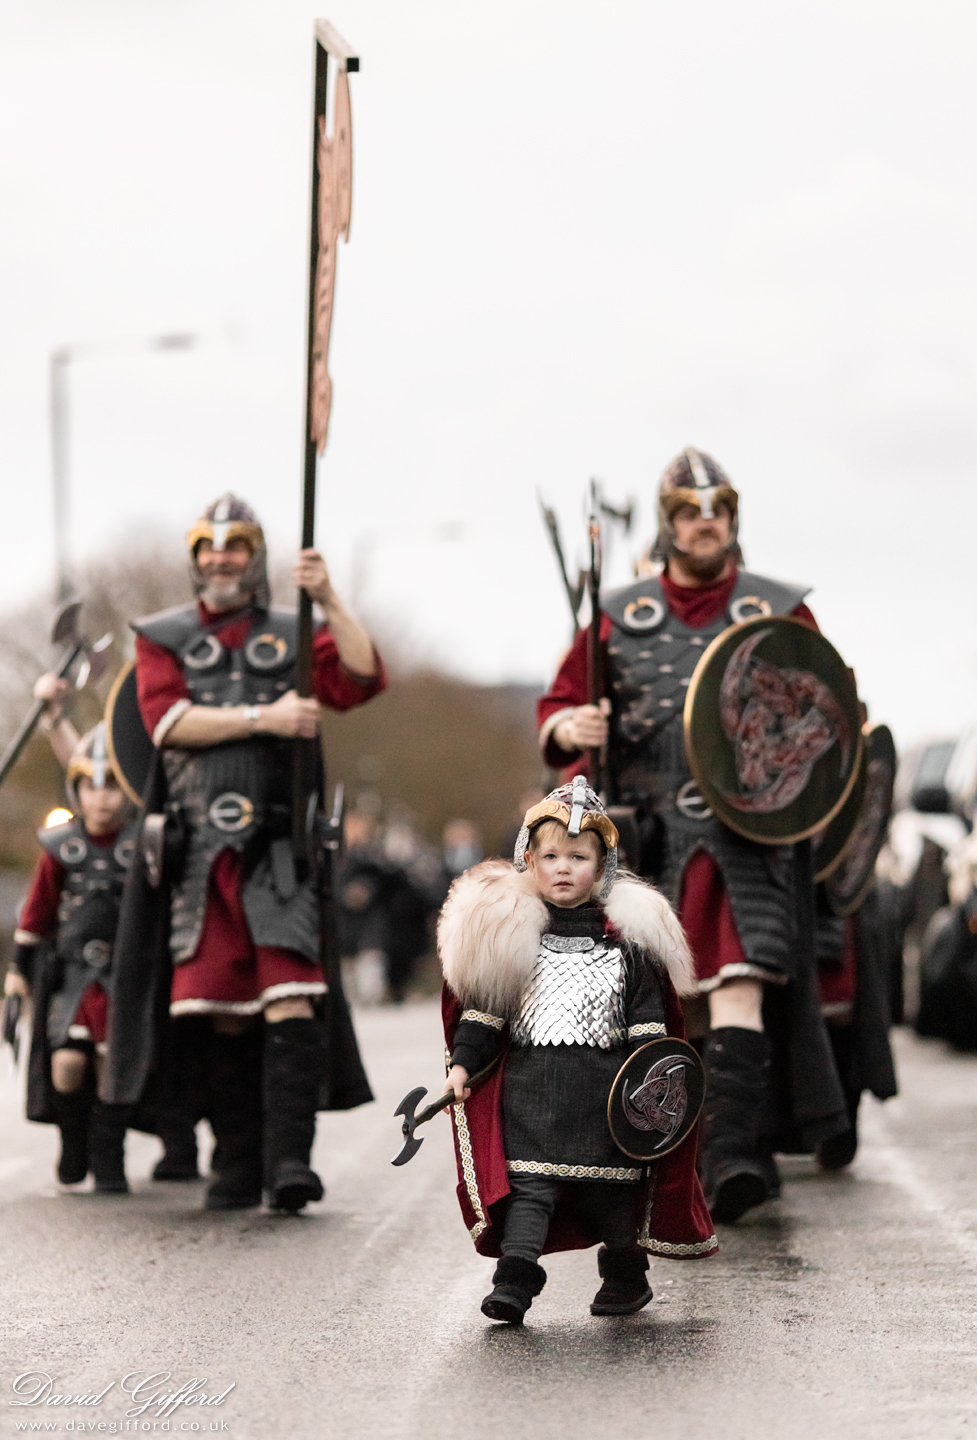 Up Helly Aa 2020: Leading the Ranks